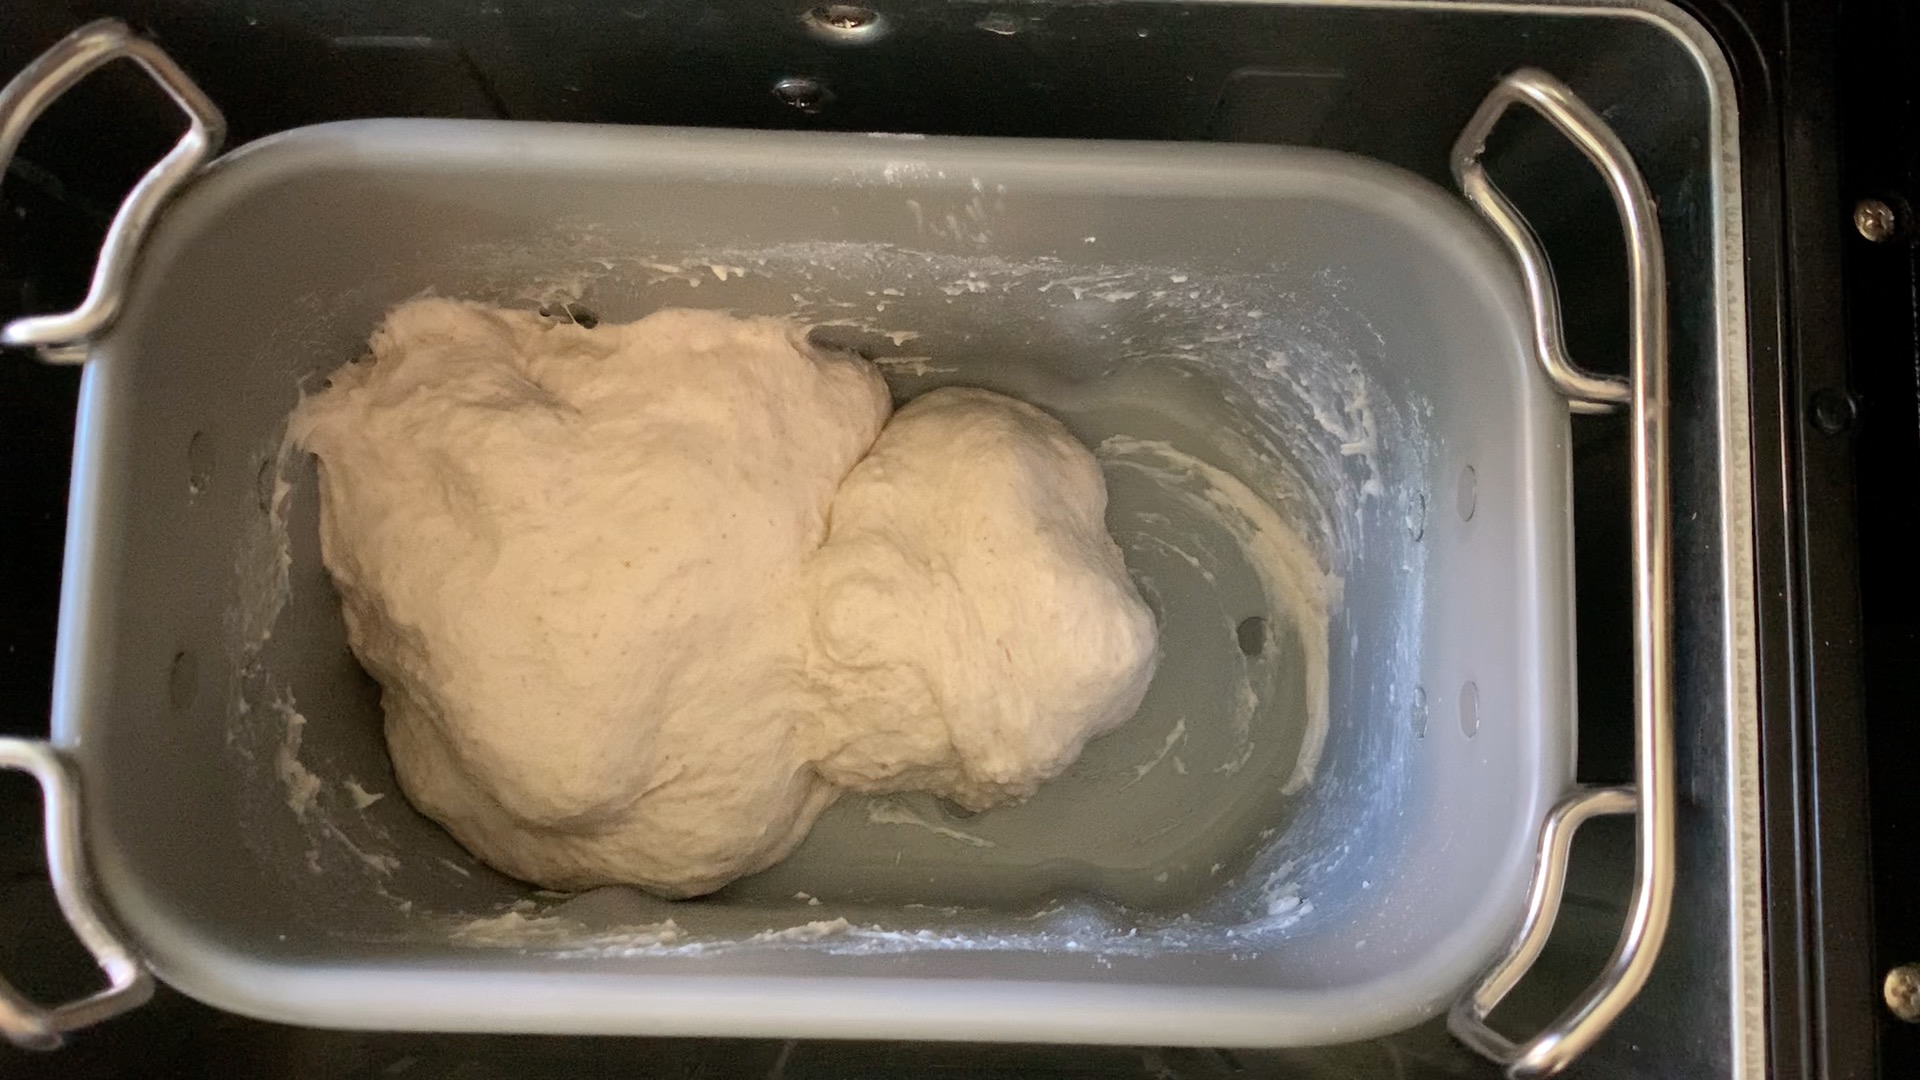 dough after kneading for 10-15 minutes